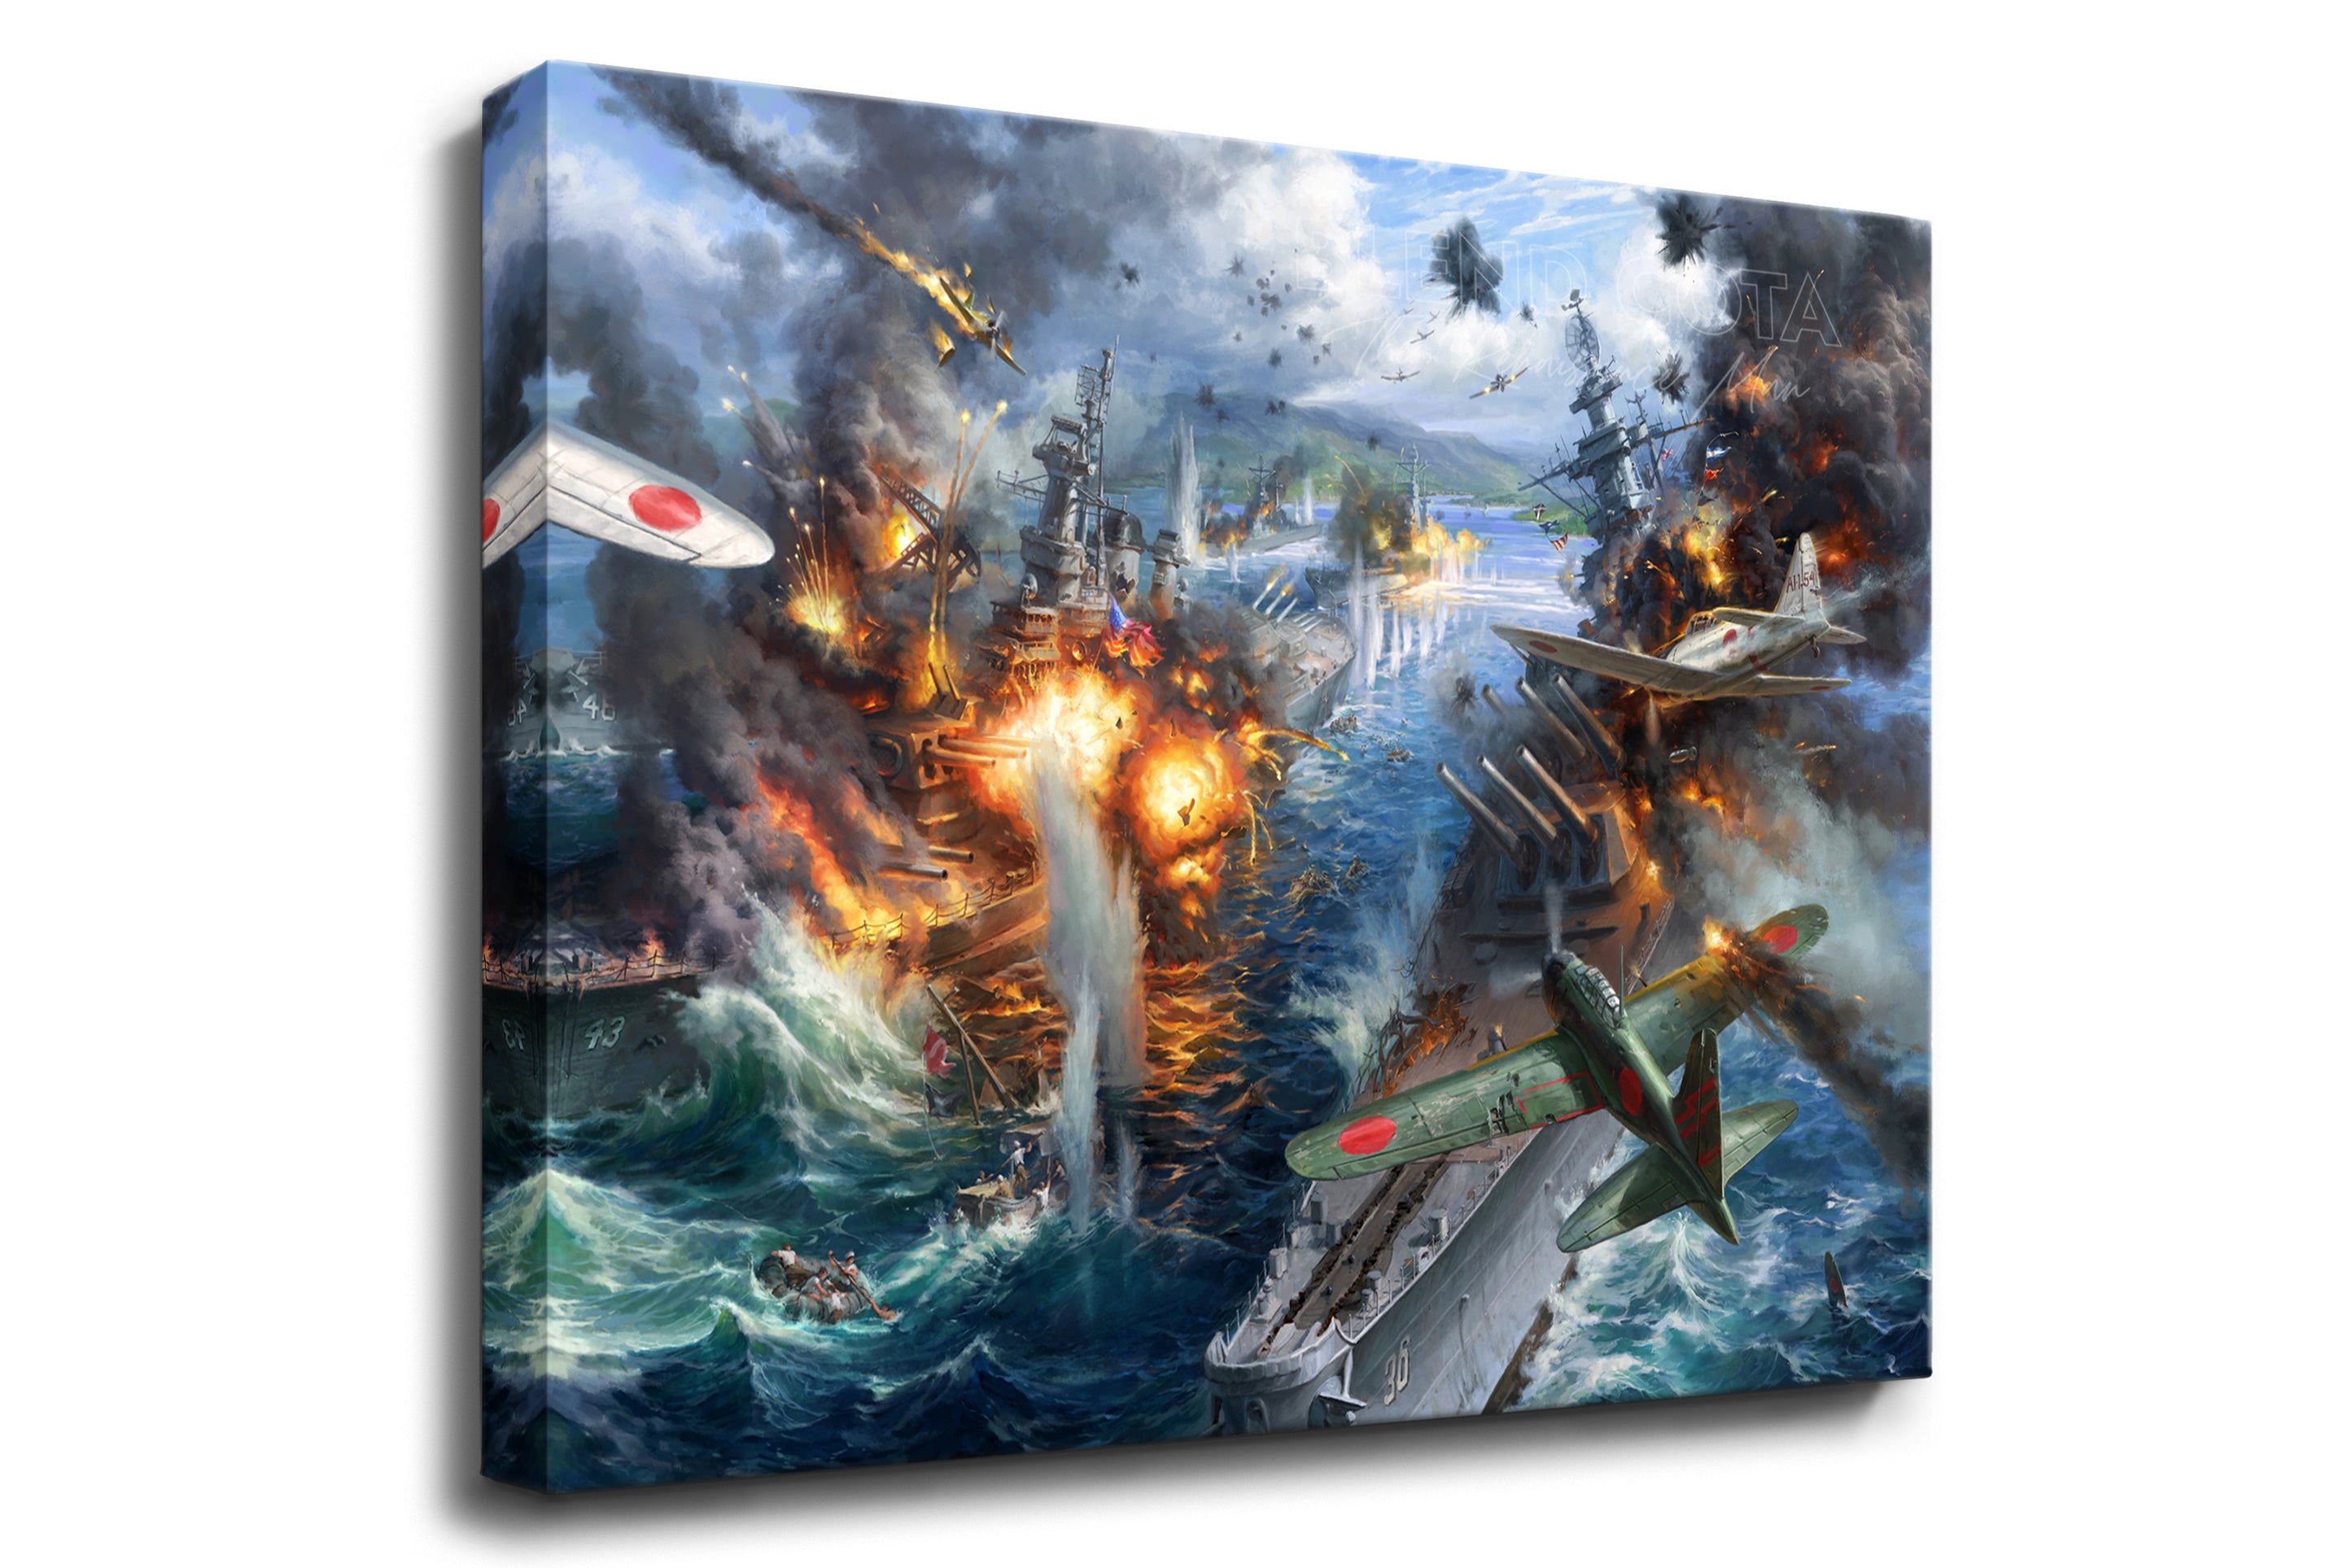 Canvas Wall art print of the attack on Pearl Harbor, Japanese planes bombing American vessels and battleships, on a background of destruction, smoke and fire, realism style with detailed brushstrokes.